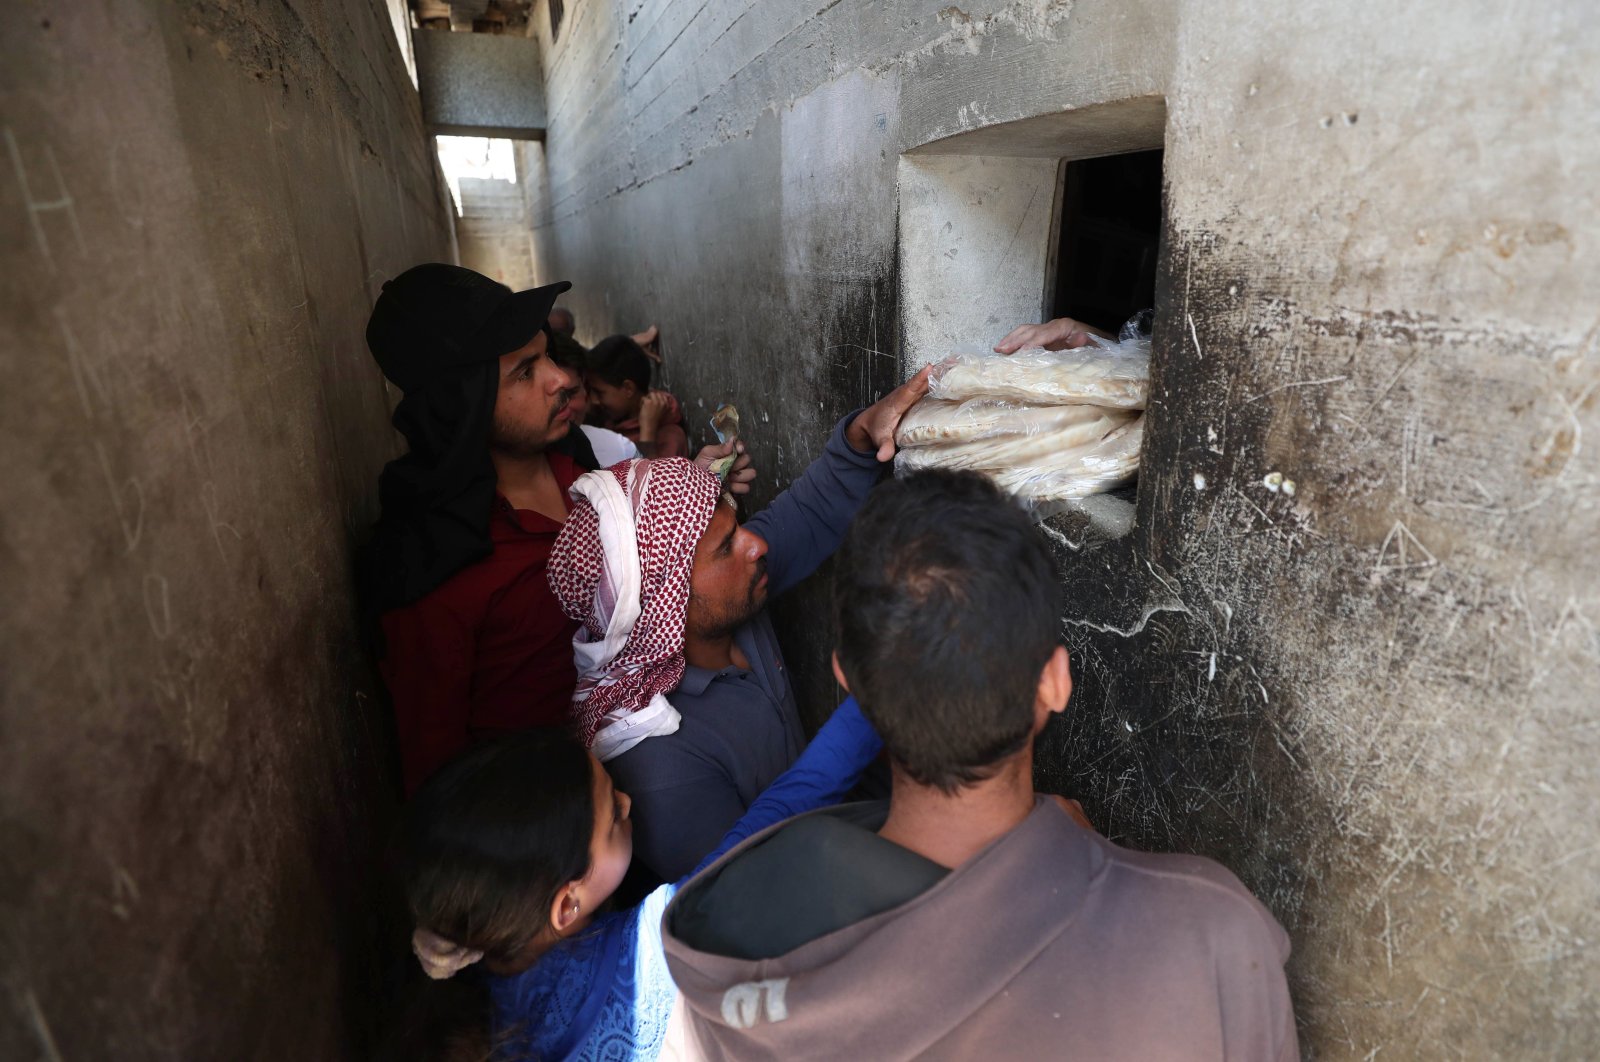 Syrians buy bread at a shop in the town of Binnish in the country's northwestern Idlib province, June 9, 2020. (AFP Photo)